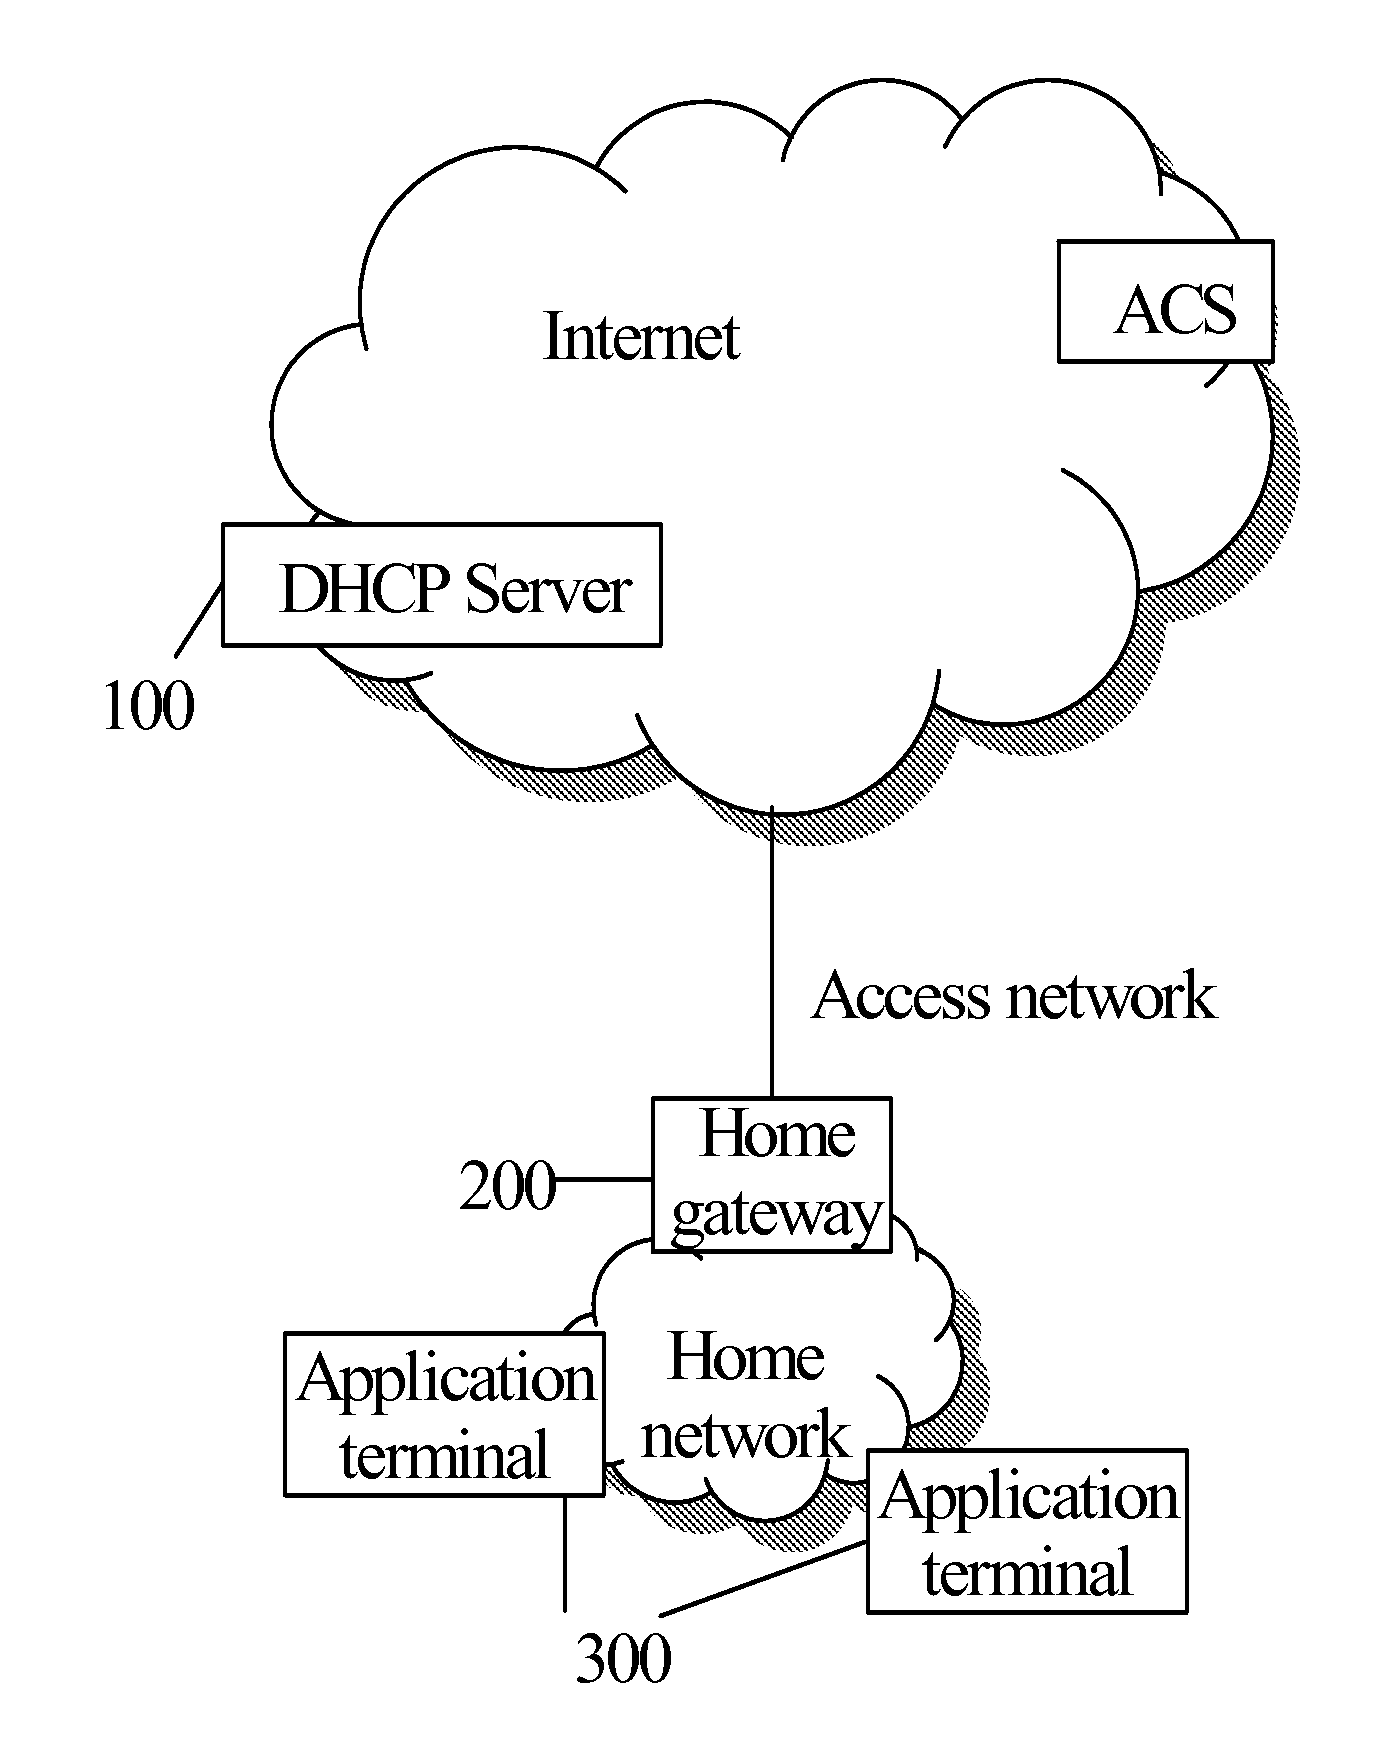 Device, system, and method for automatically configuring application terminals in home network